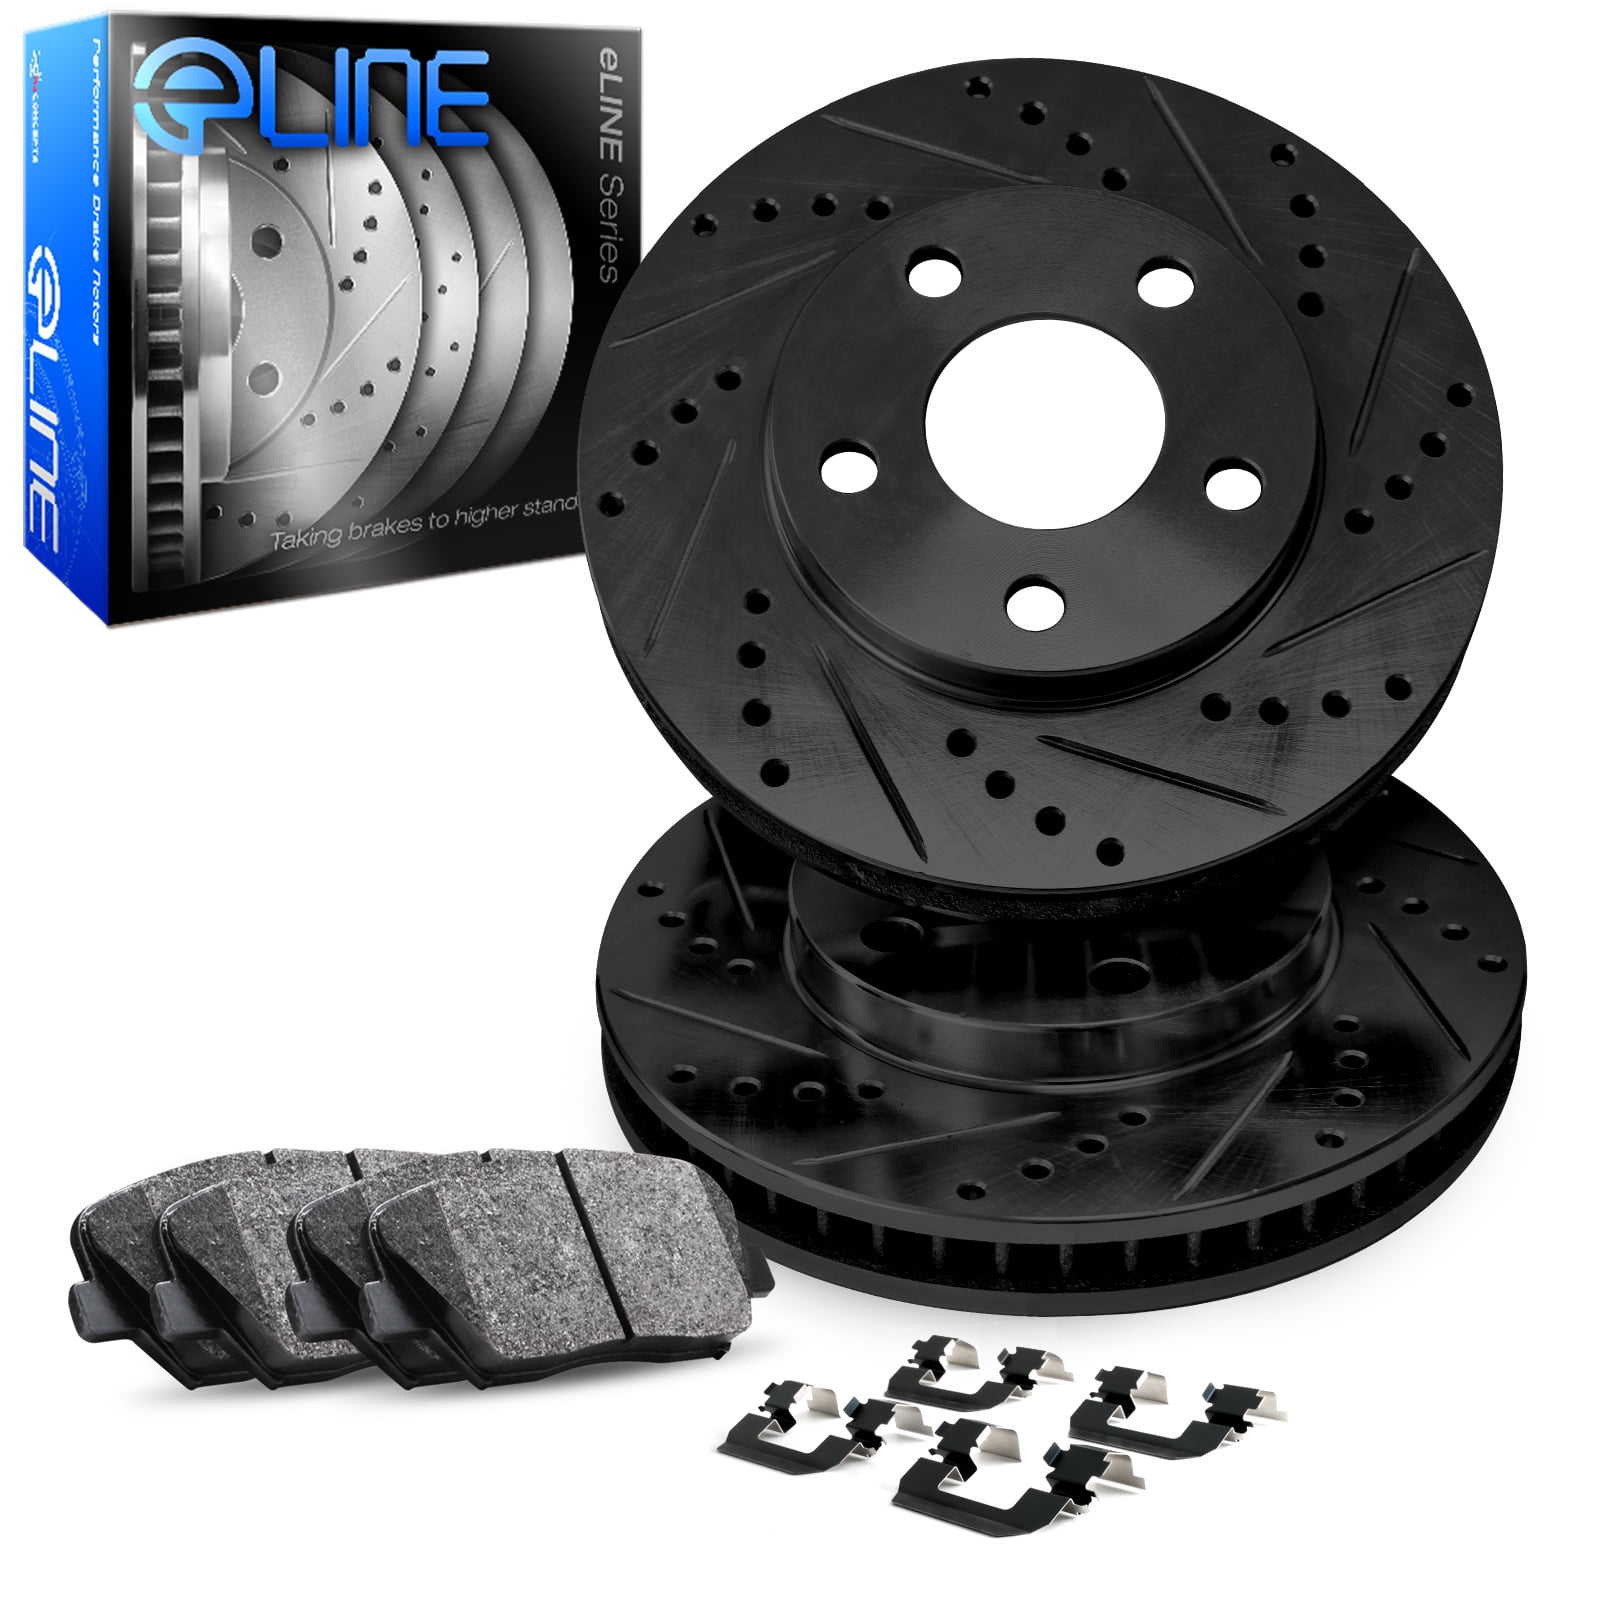 Ceramic Brake Pads And Rotors Front Rear For Dodge Dart 2013-2016 Drilled